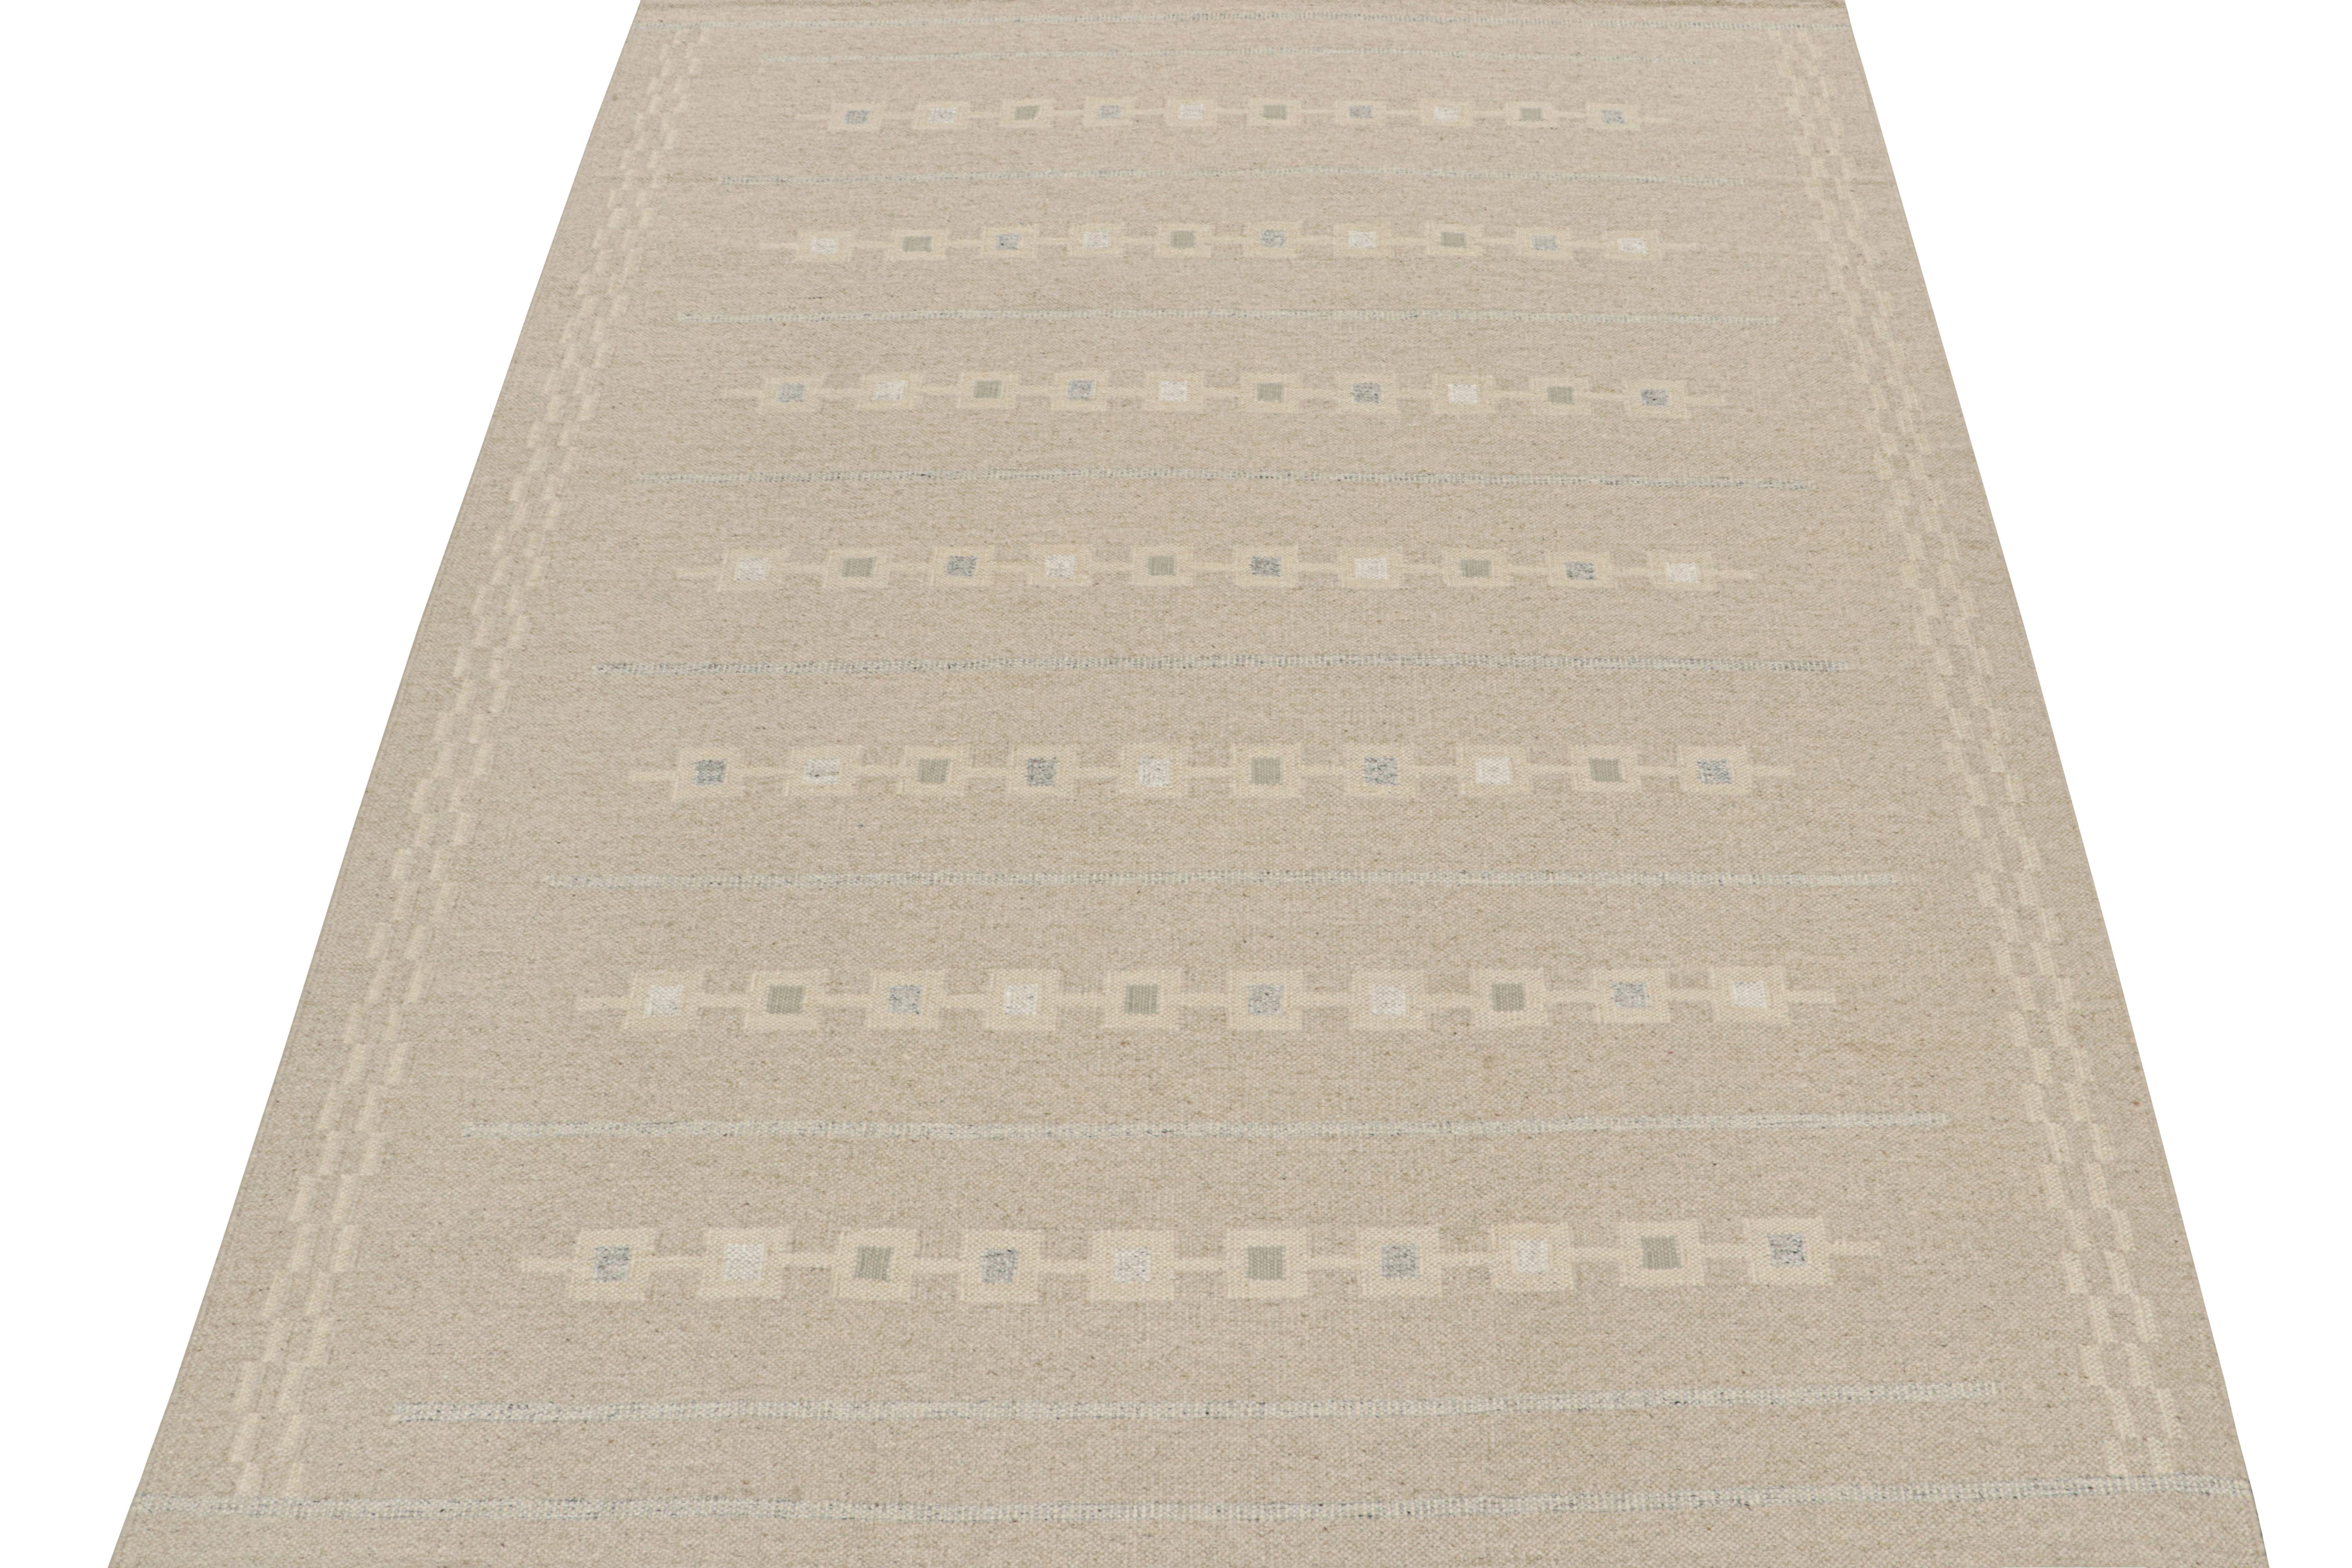 This 9x12 kilim is a new addition to the award-winning Scandinavian flat weave collection by Rug & Kilim. Handwoven in wool, its design is a bold modern take on minimalist Swedish Deco sensibilities in high-end quality.

Further on the Design:

This